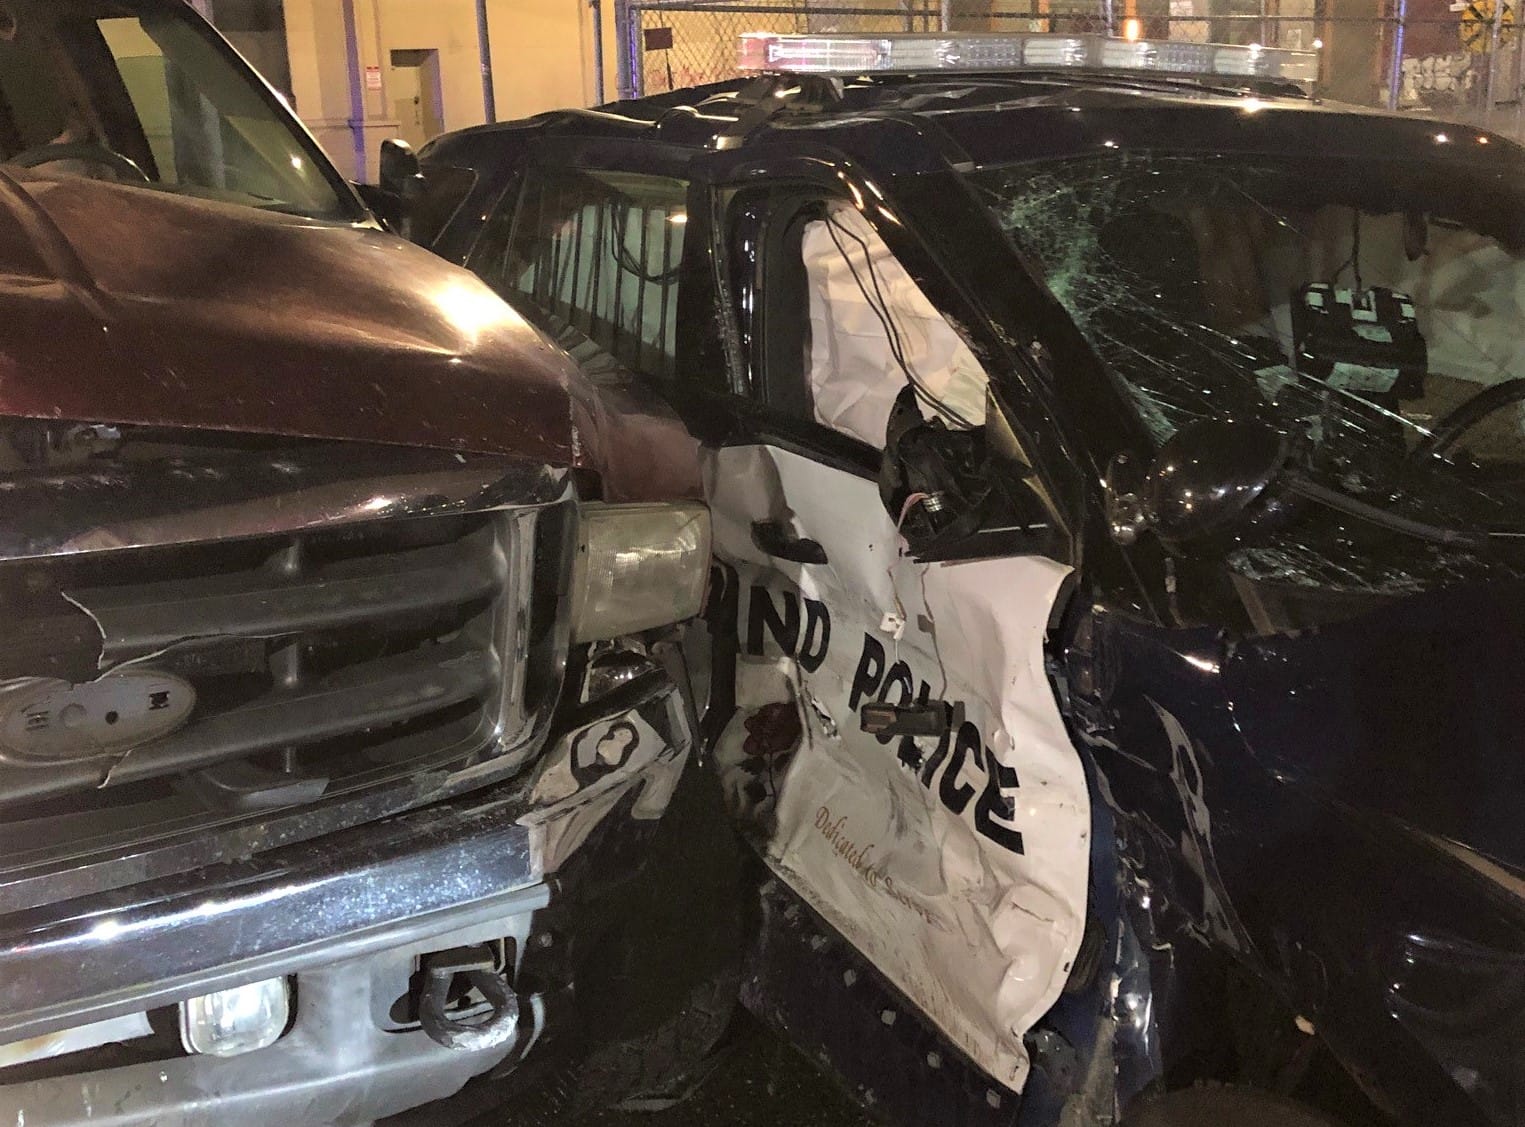 A Portland Police Bureau officer was injured early Monday in a hit-and-run crash involving a Ford F-350 pickup that had been reported stolen in Vancouver.